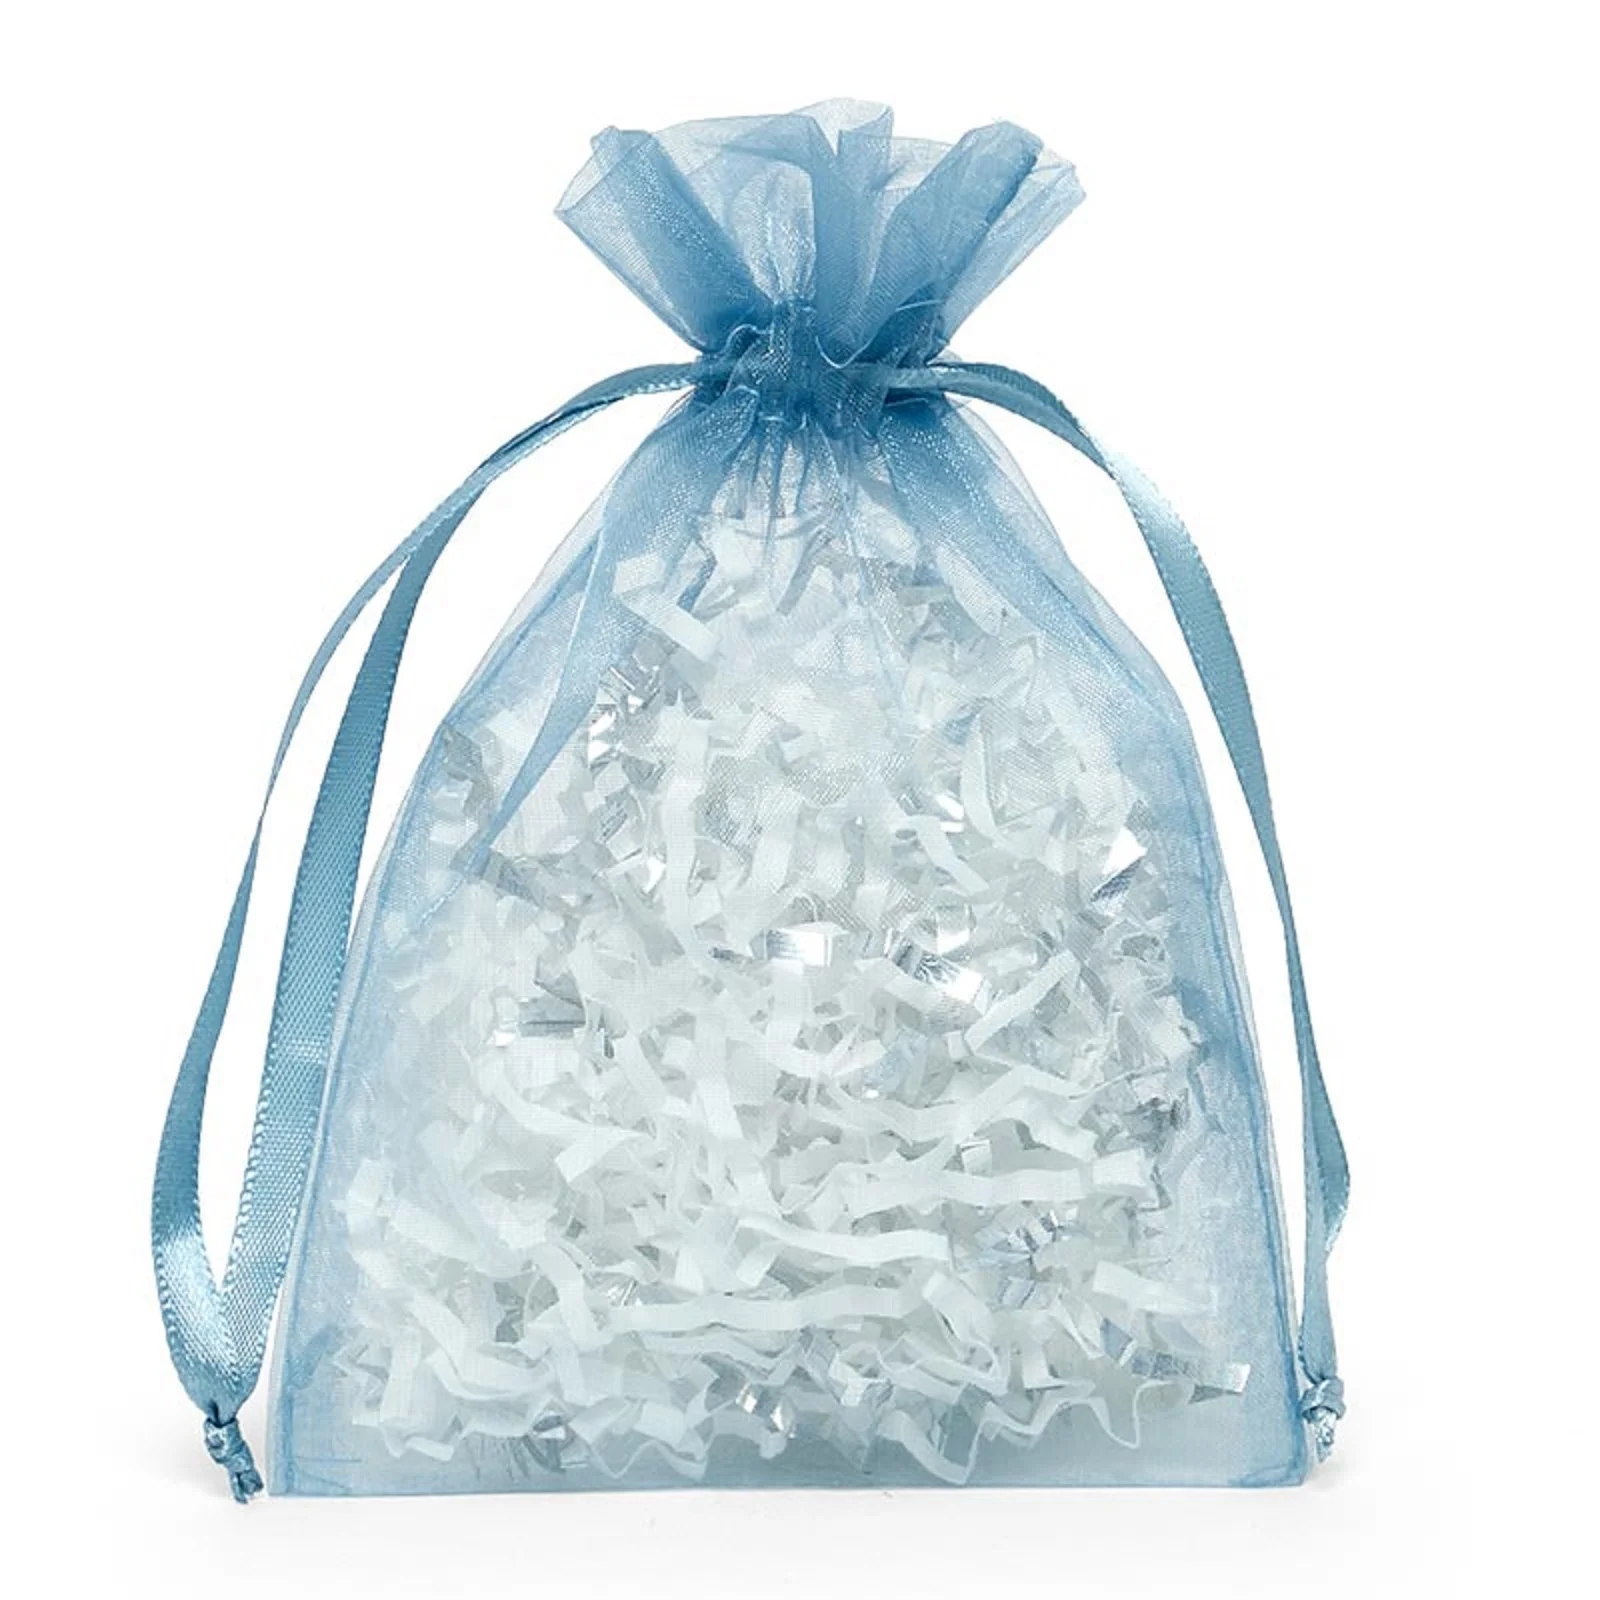 Premium Quality Smoke Blue Organza Jewelry and Gift Packaging Pouch in Stock (1600741571123)